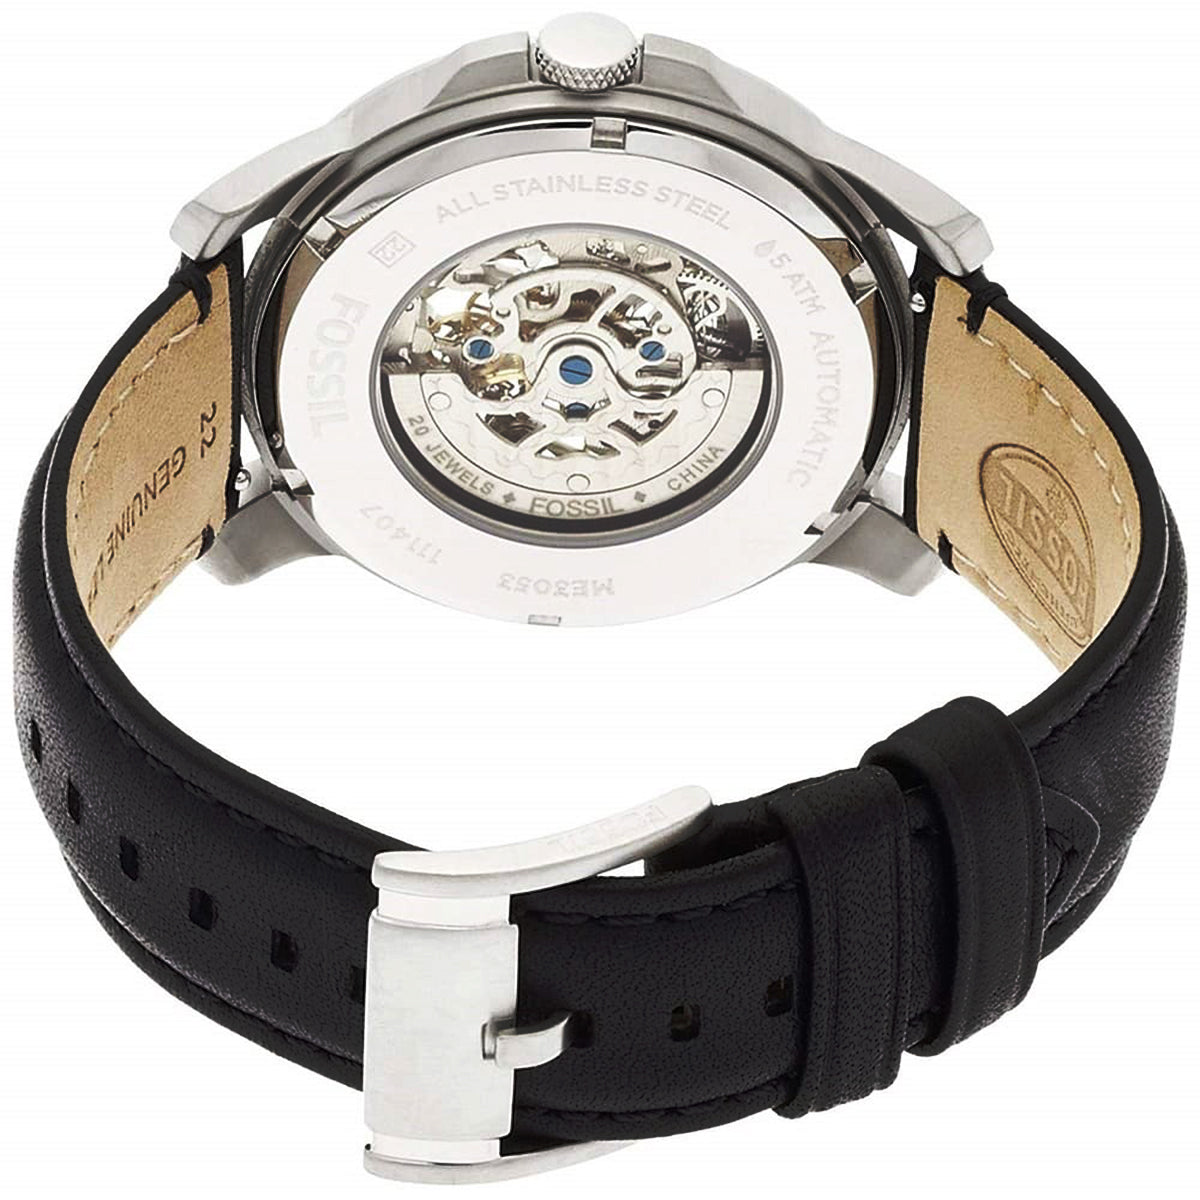 Men's Grant automatic watch with Black Leather strap